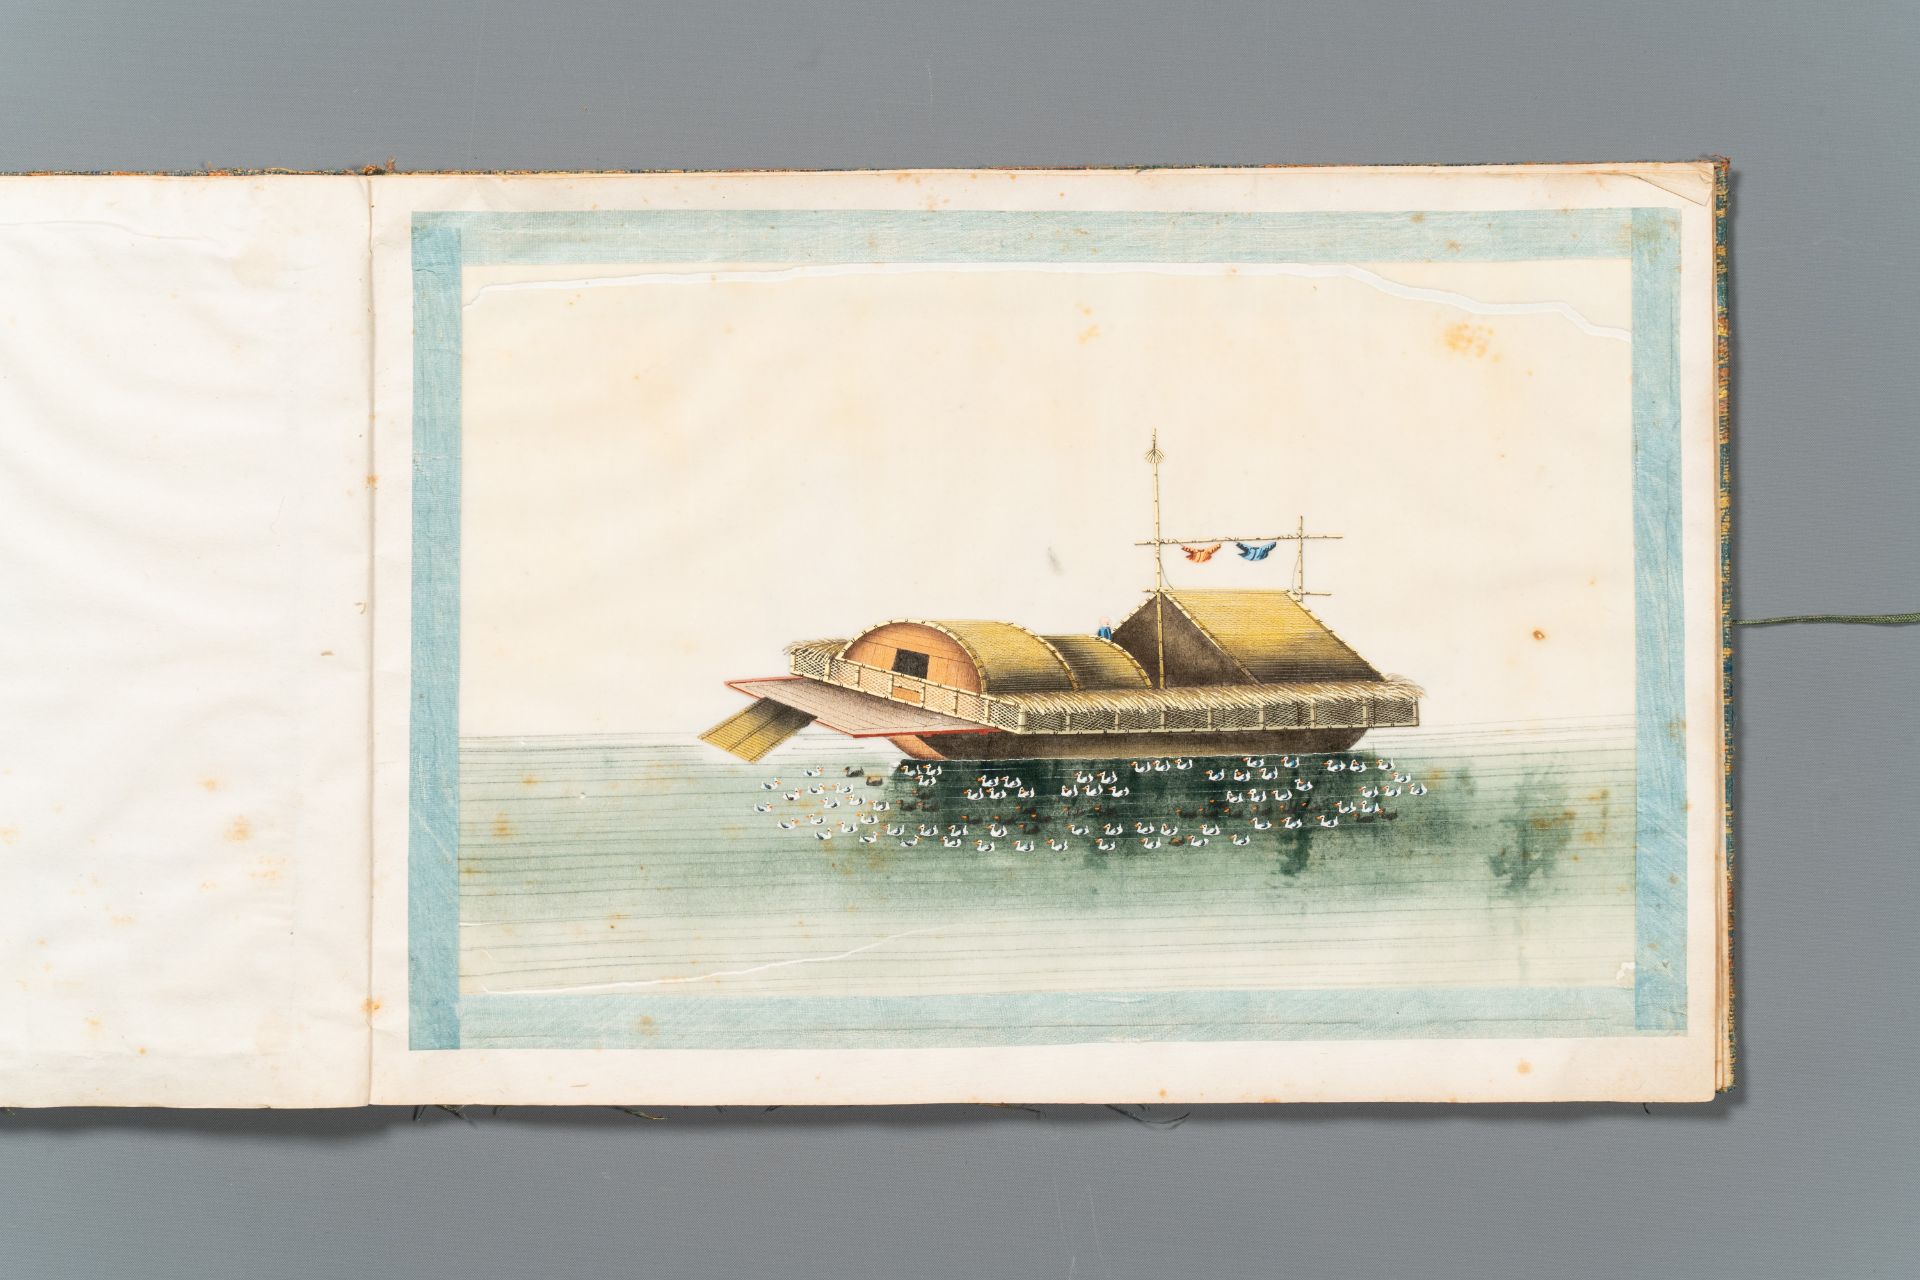 A rare album with Chinese rice paper paintings of 'Hong' views, figures and ships, Canton, Foekhing - Image 9 of 14